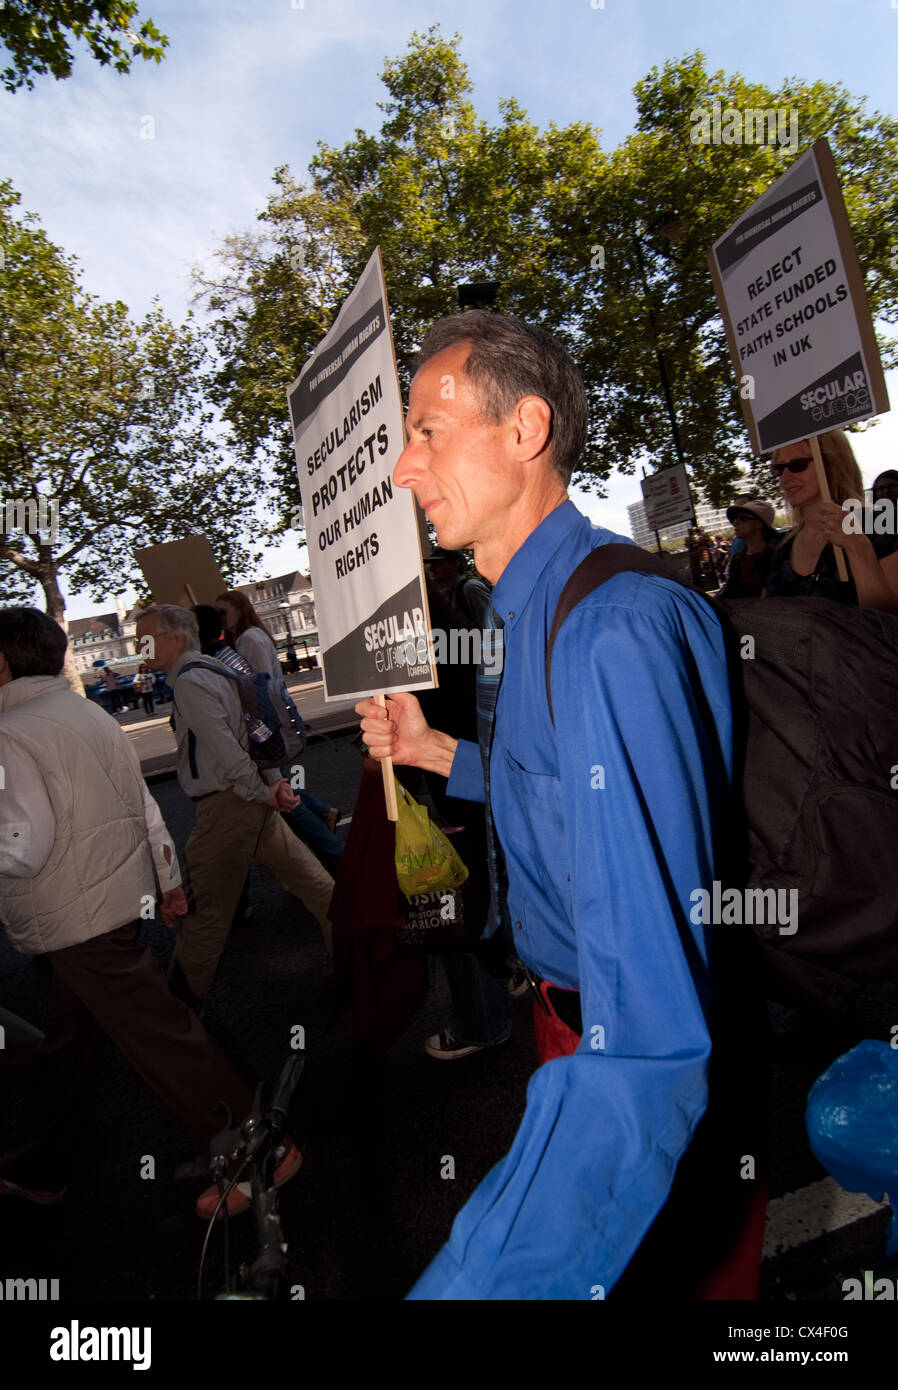 Peter Tatchell campaigning “Secular Europe Campaign” Protest March&Rally central London.  Sat 15th September 2012 Stock Photo